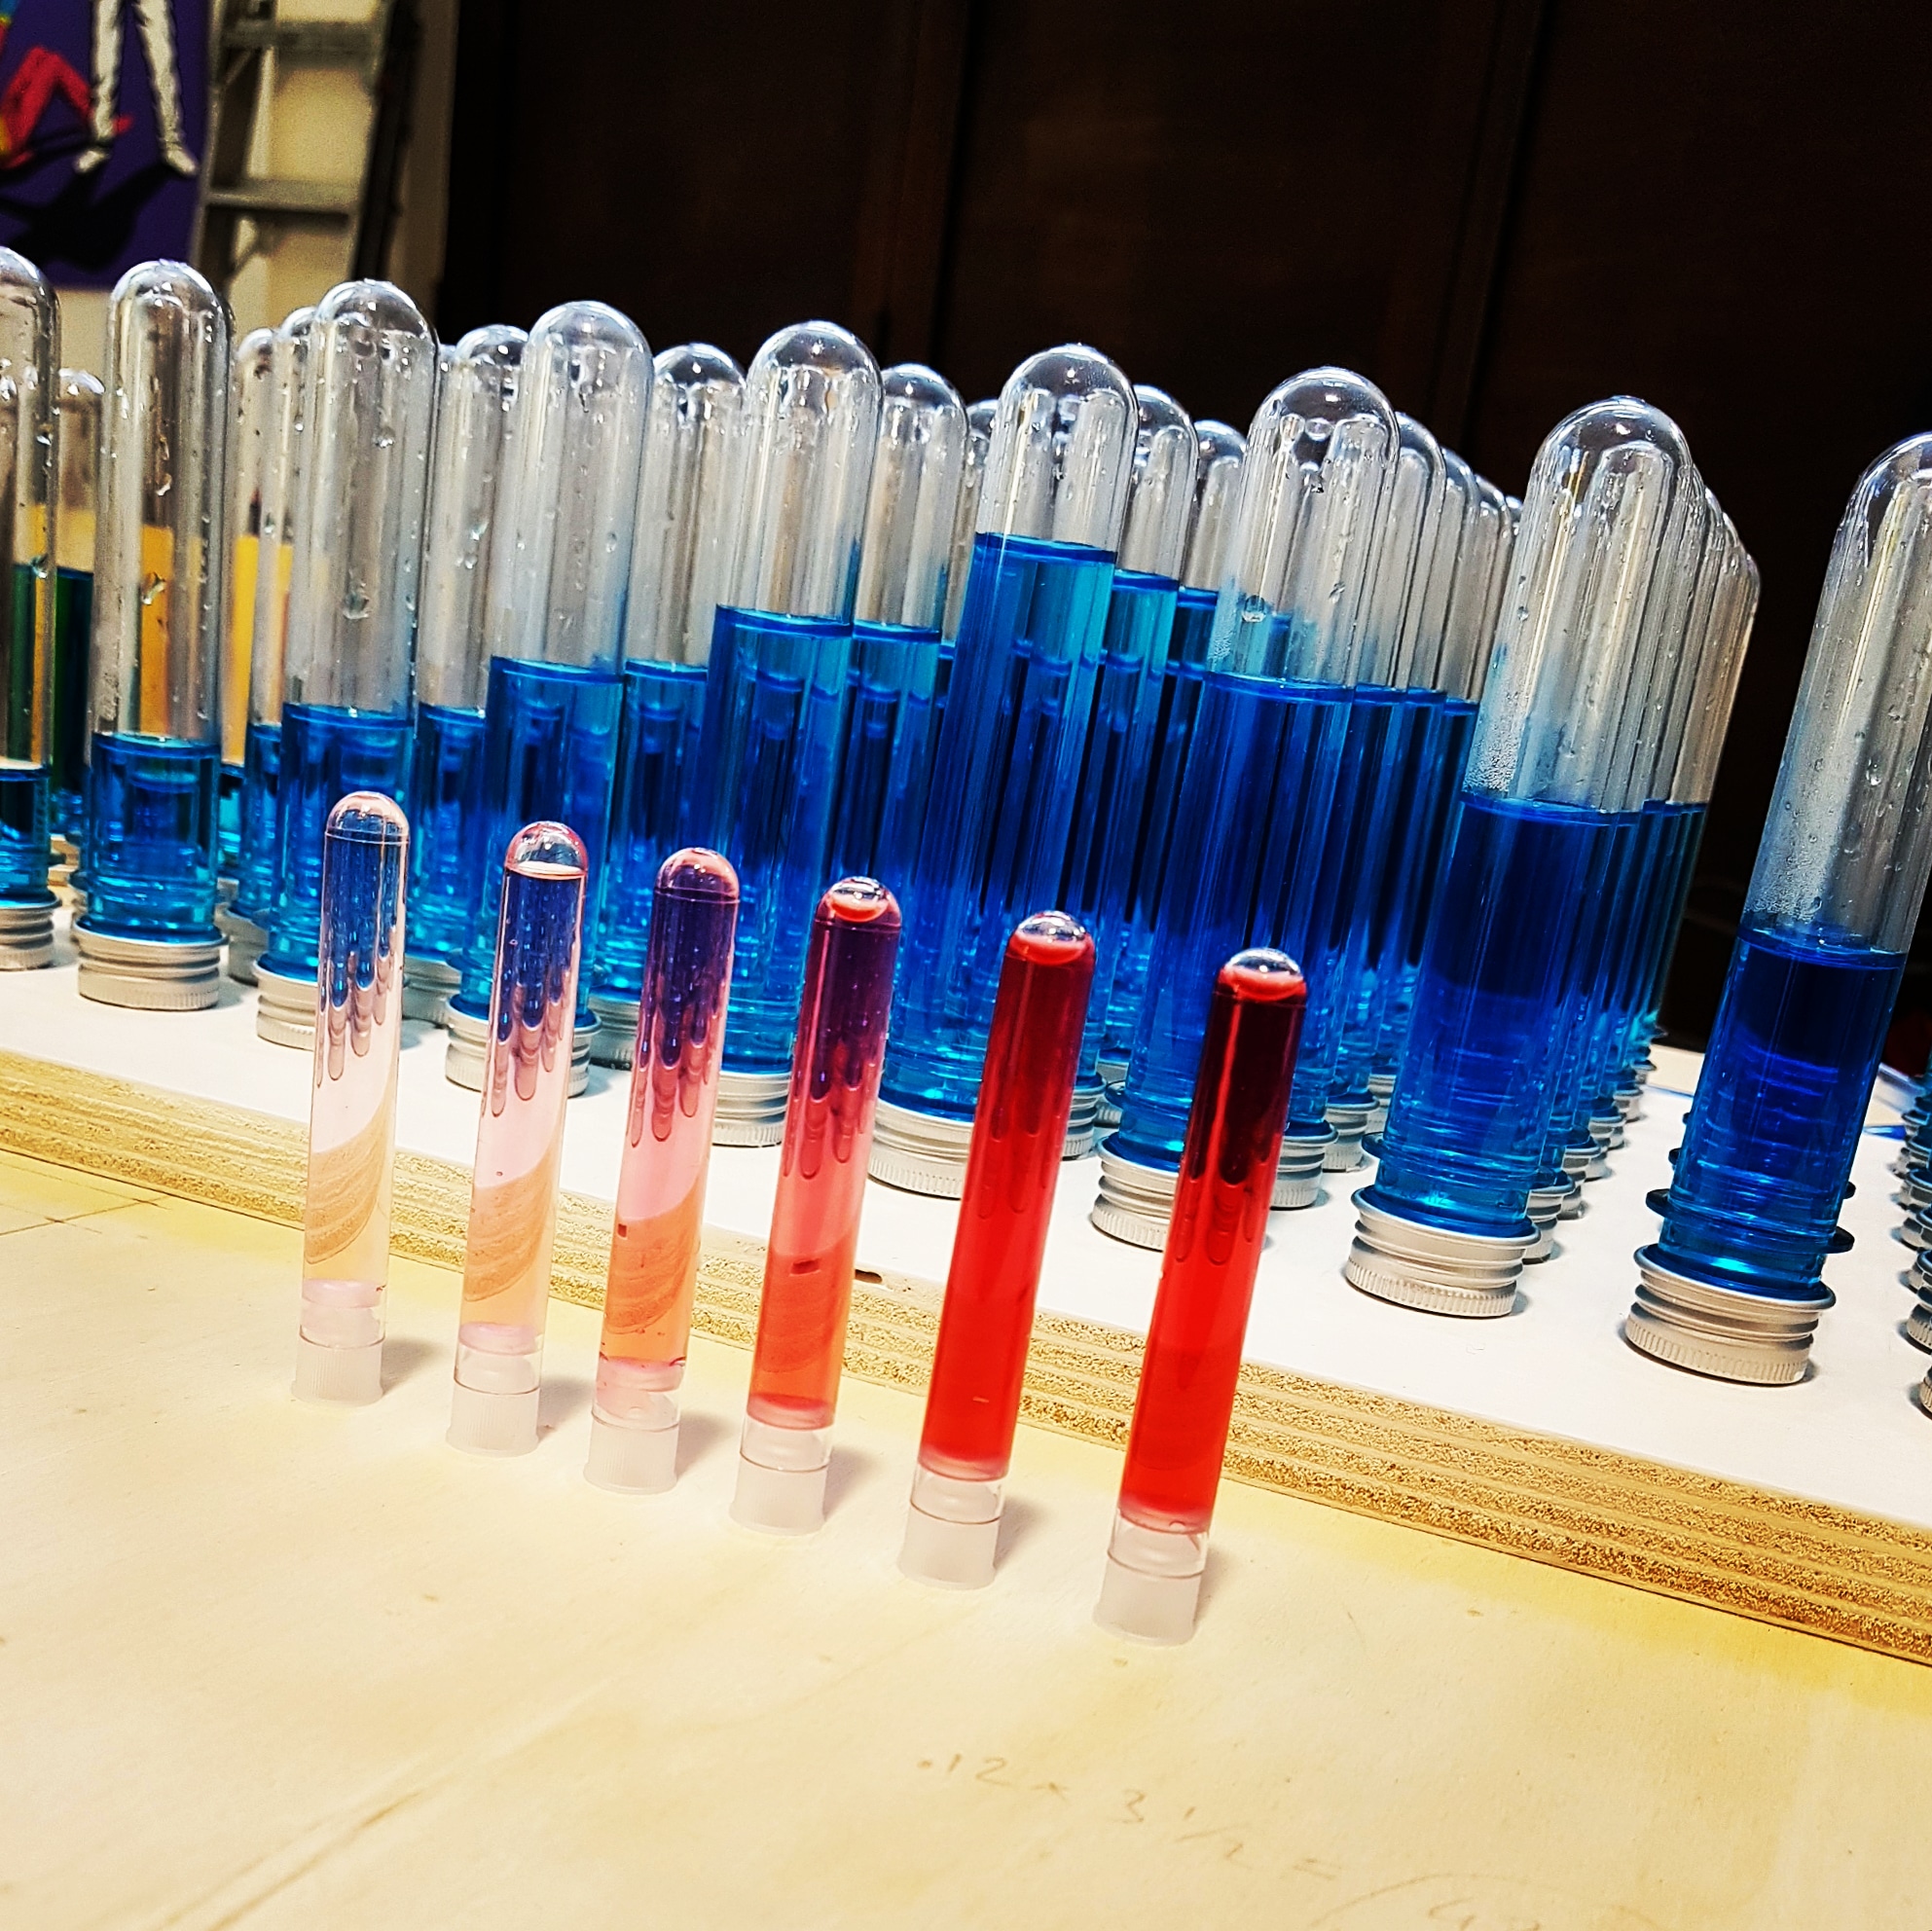 Test tube art from Anthony Moman